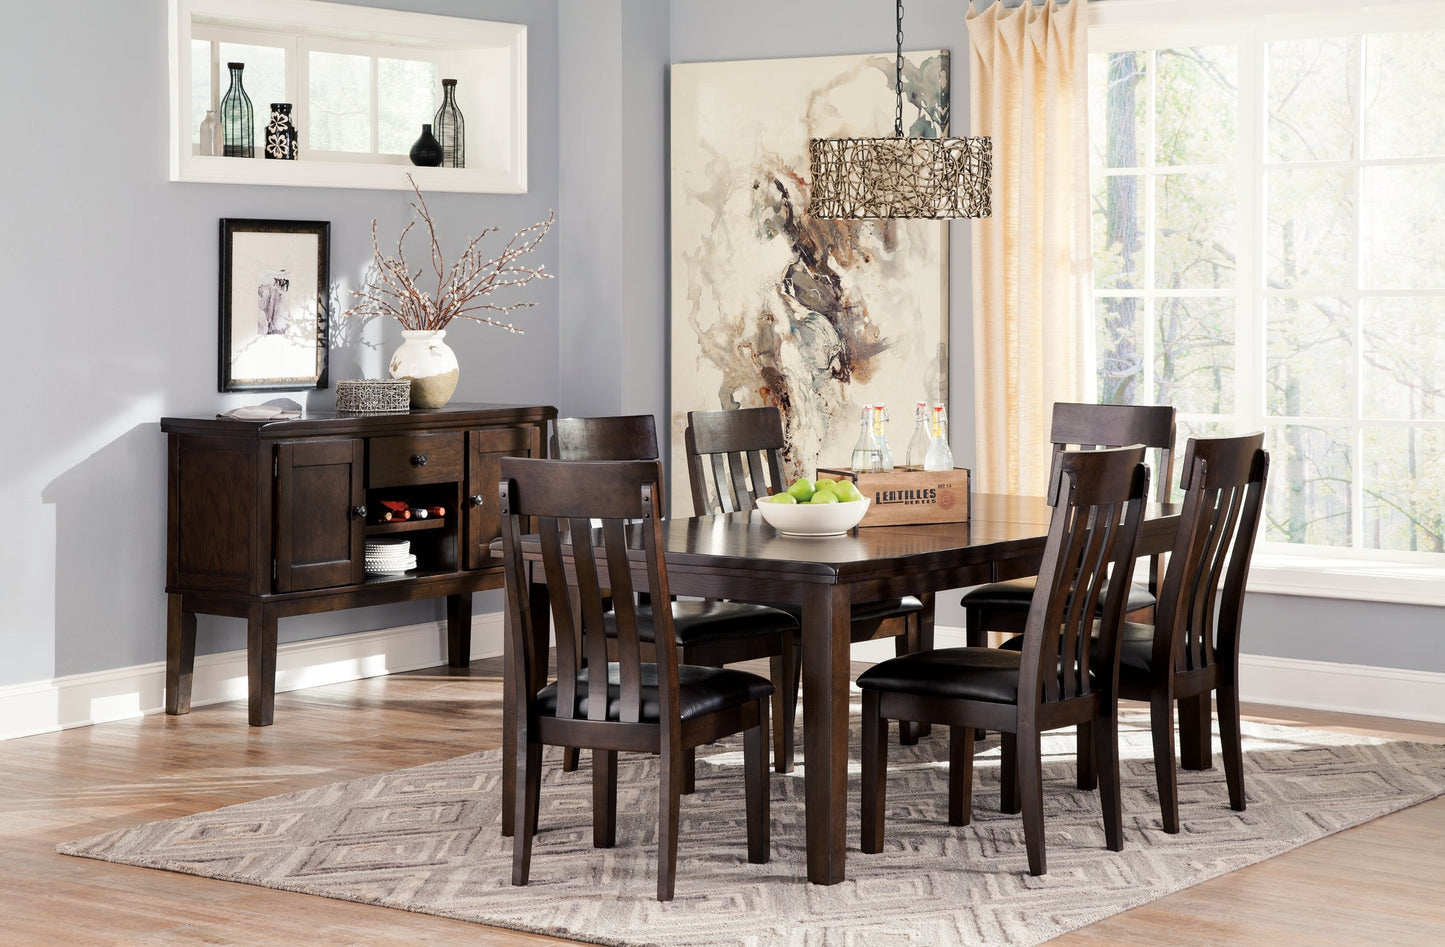 Haddigan Dining Table and 6 Chairs at Walker Mattress and Furniture Locations in Cedar Park and Belton TX.